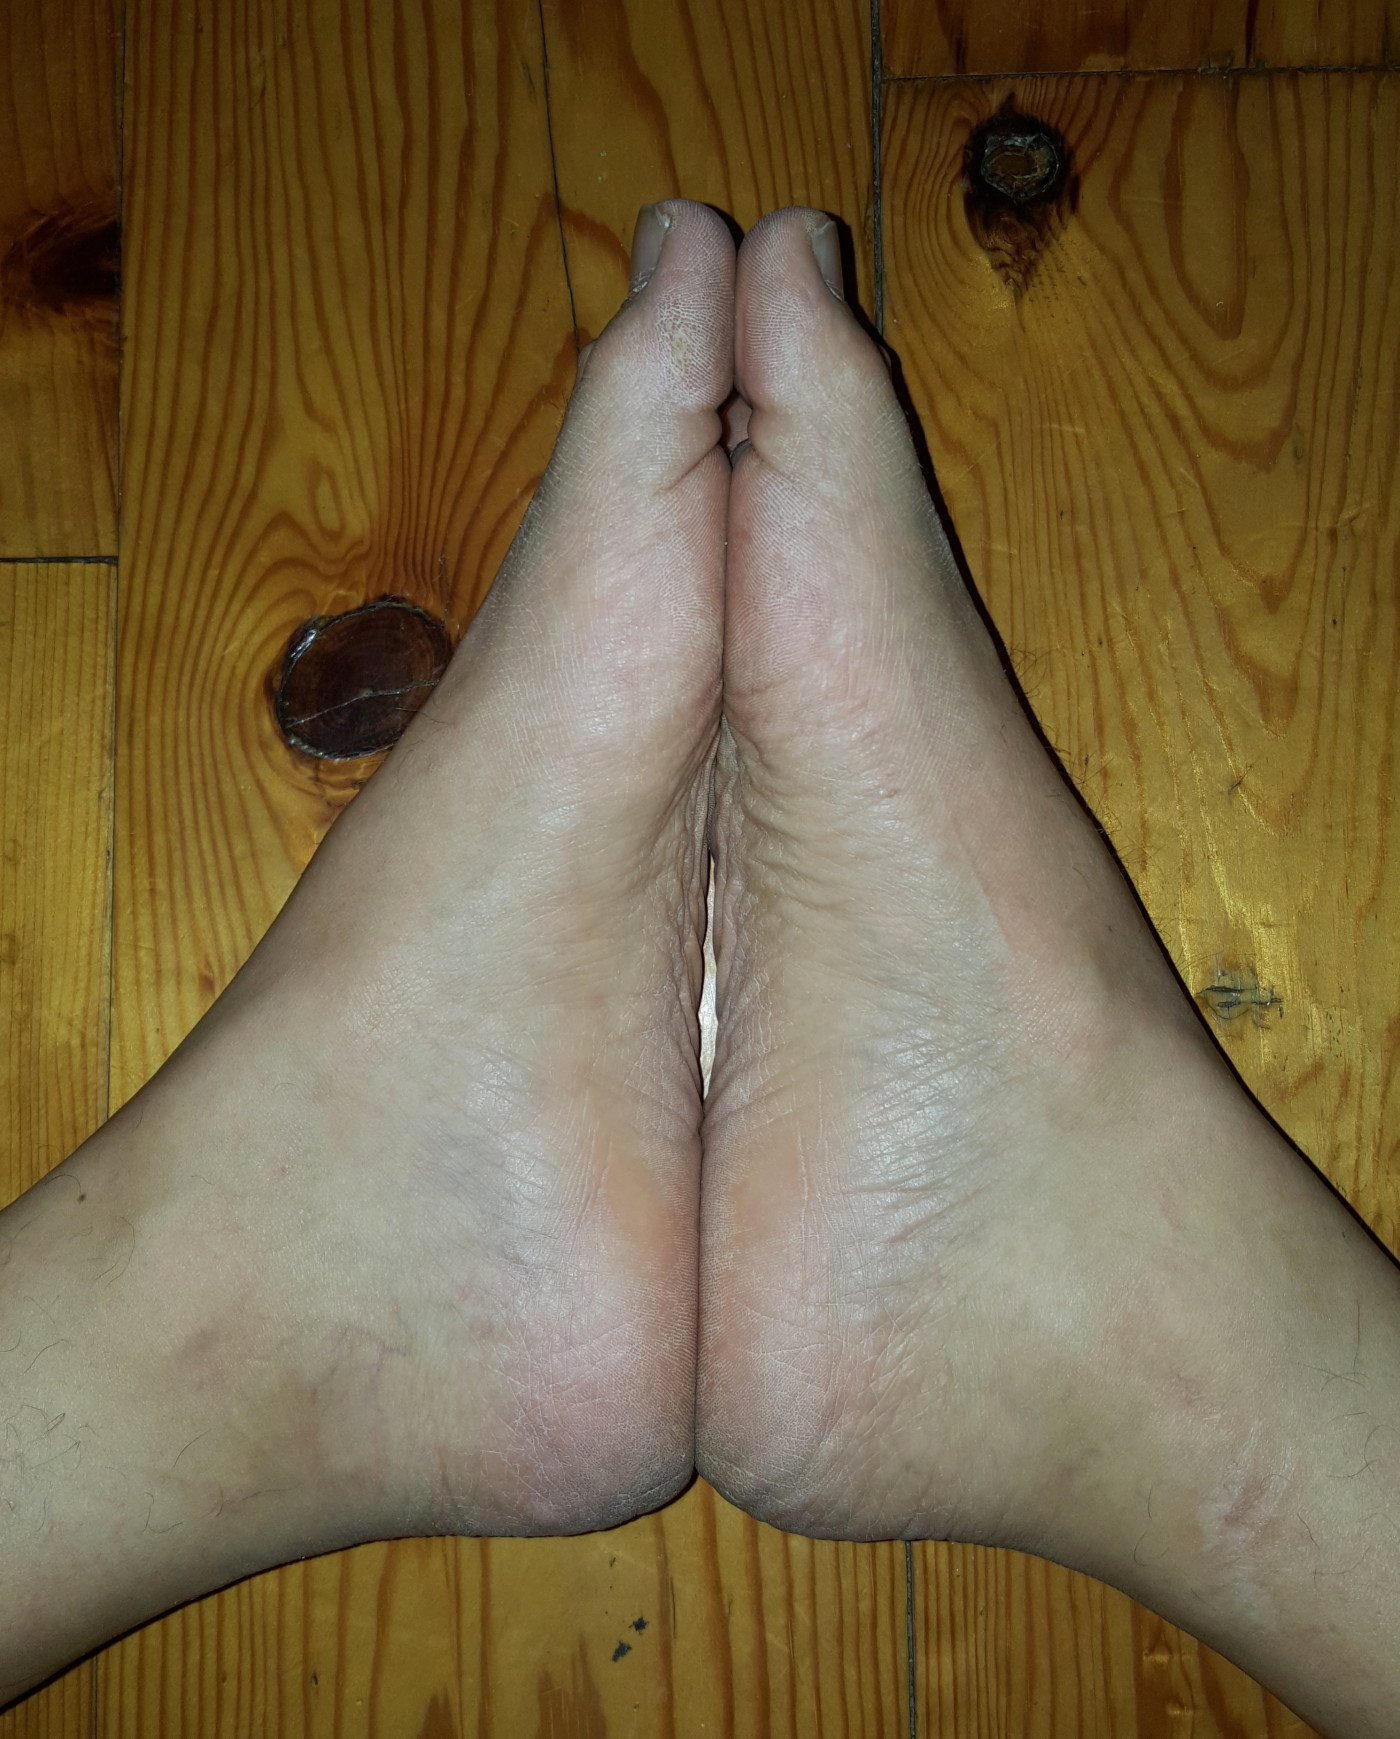 The Two Very Different Arches of My Feet